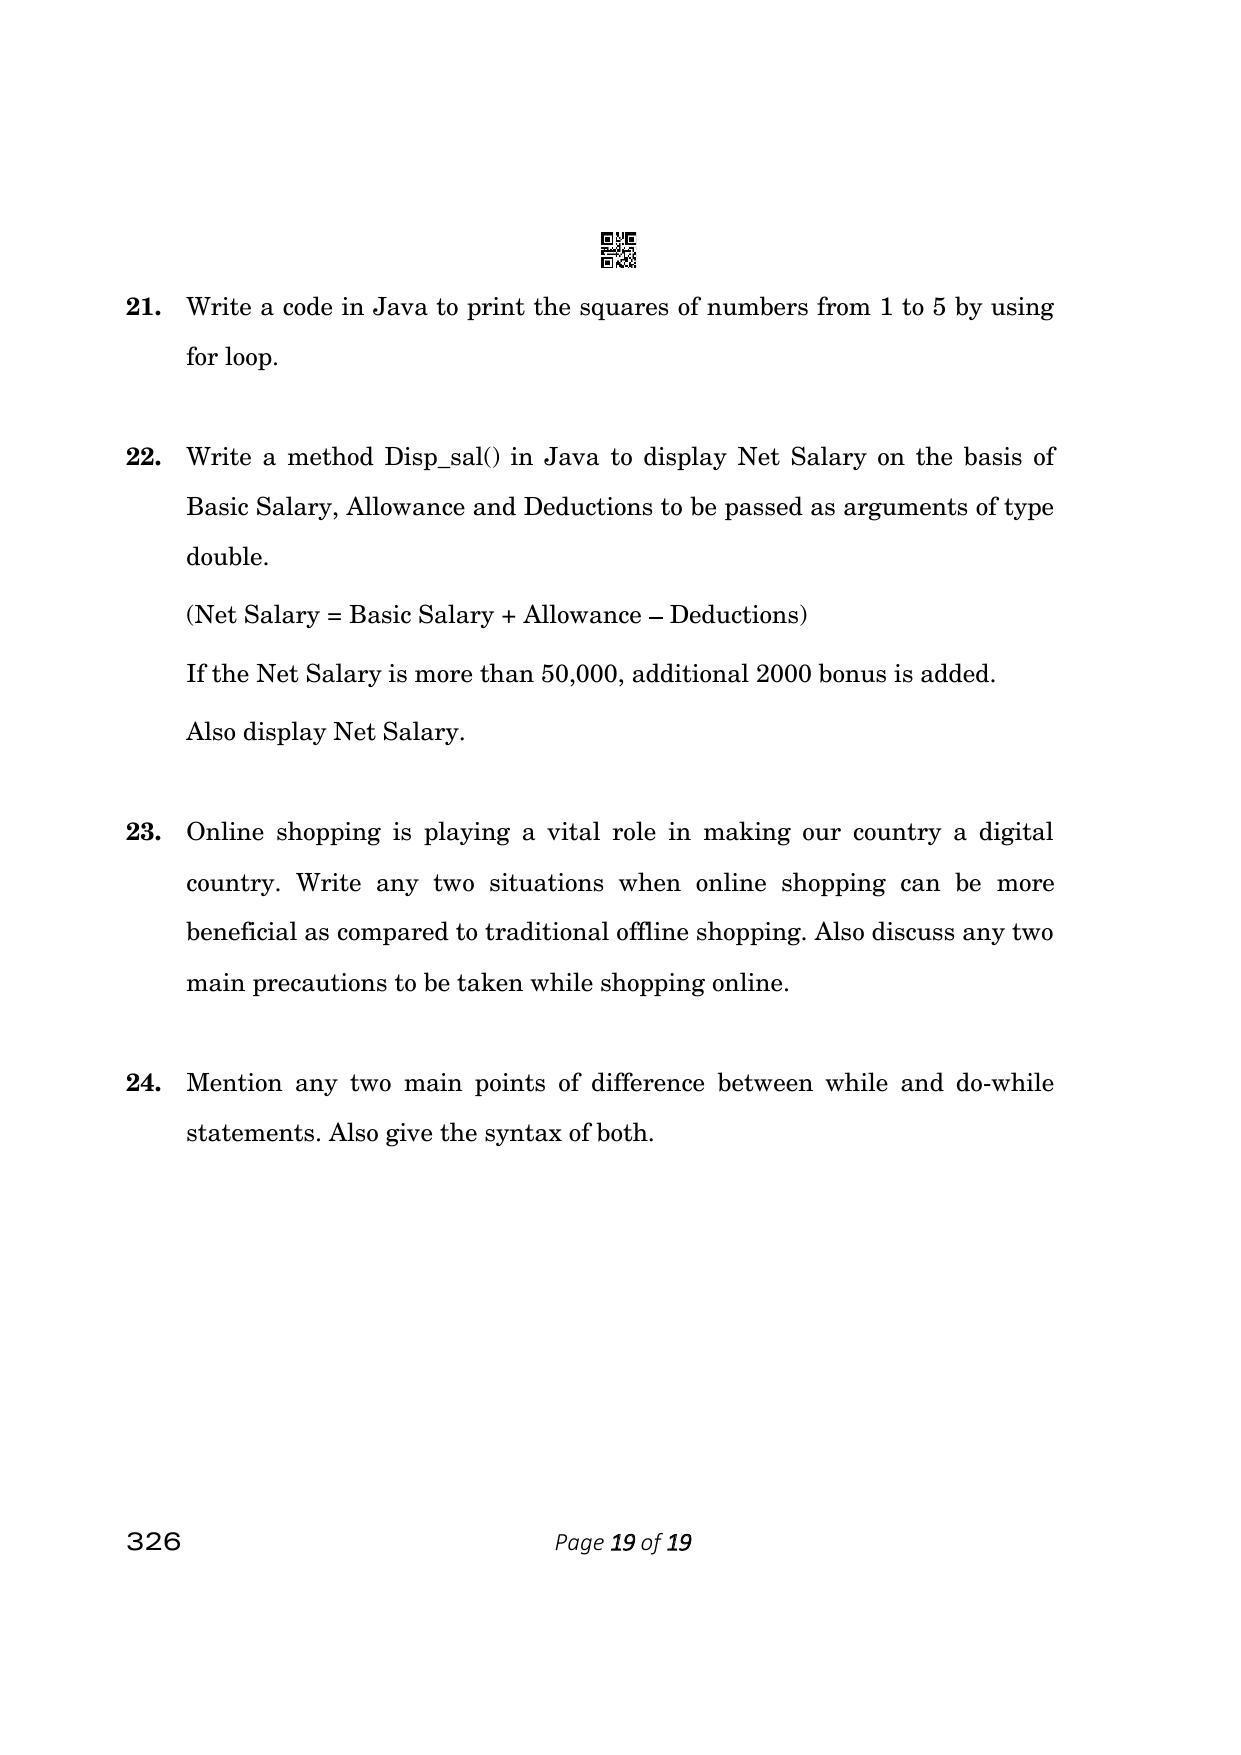 CBSE Class 12 Information Technology (Compartment) 2023 Question Paper - Page 19